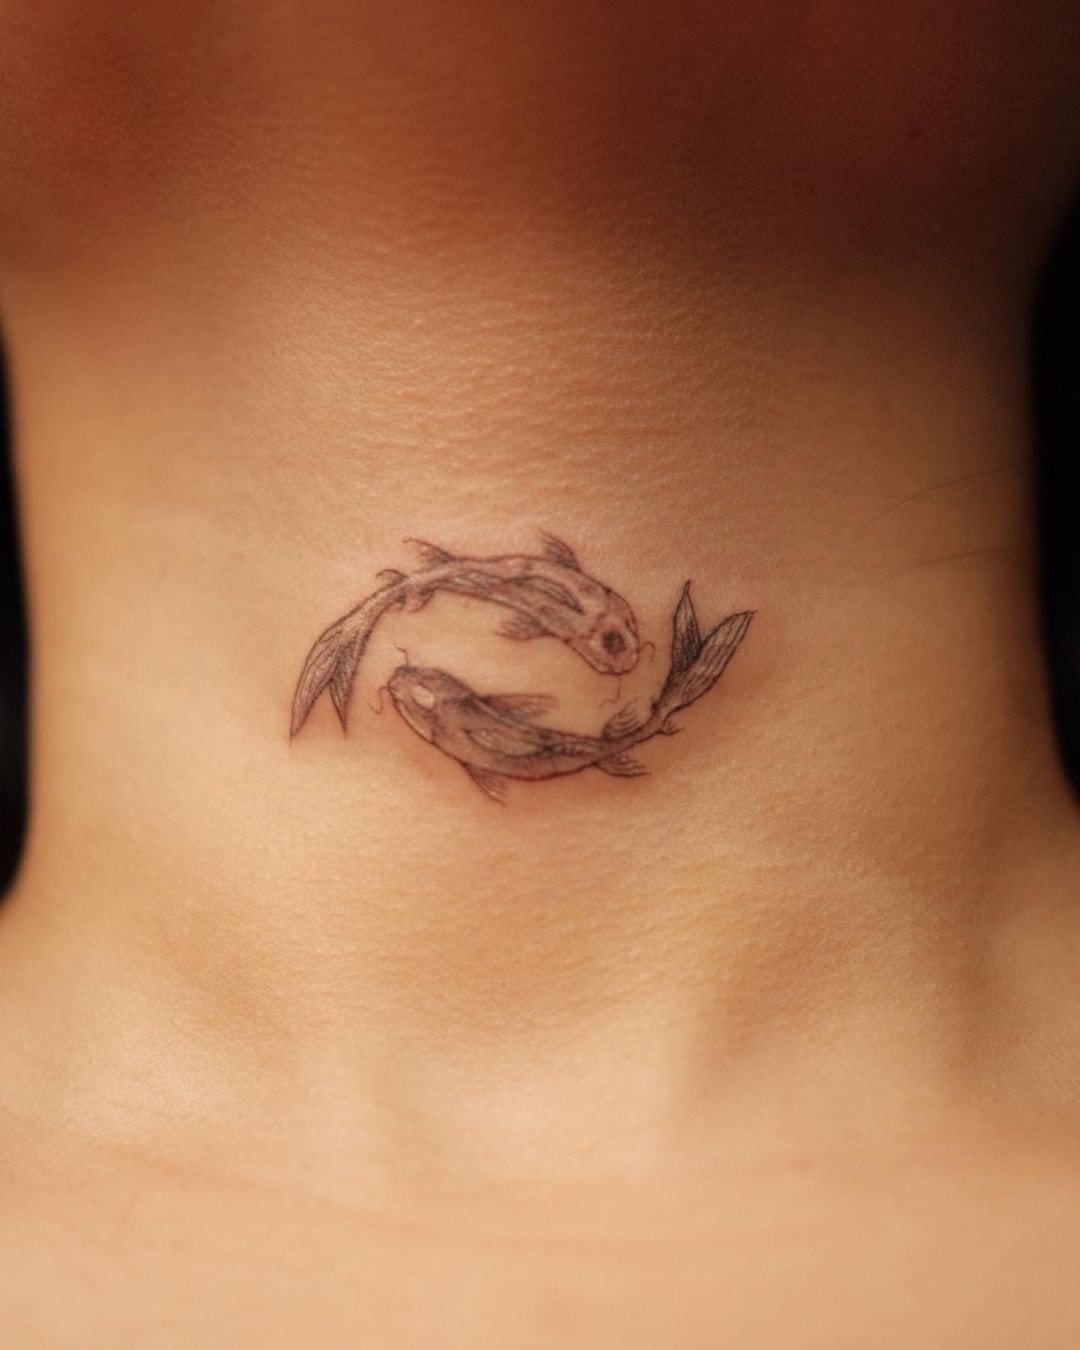 12 Elegant Neck Tattoo Design Ideas You Should Consider Getting | Preview.ph